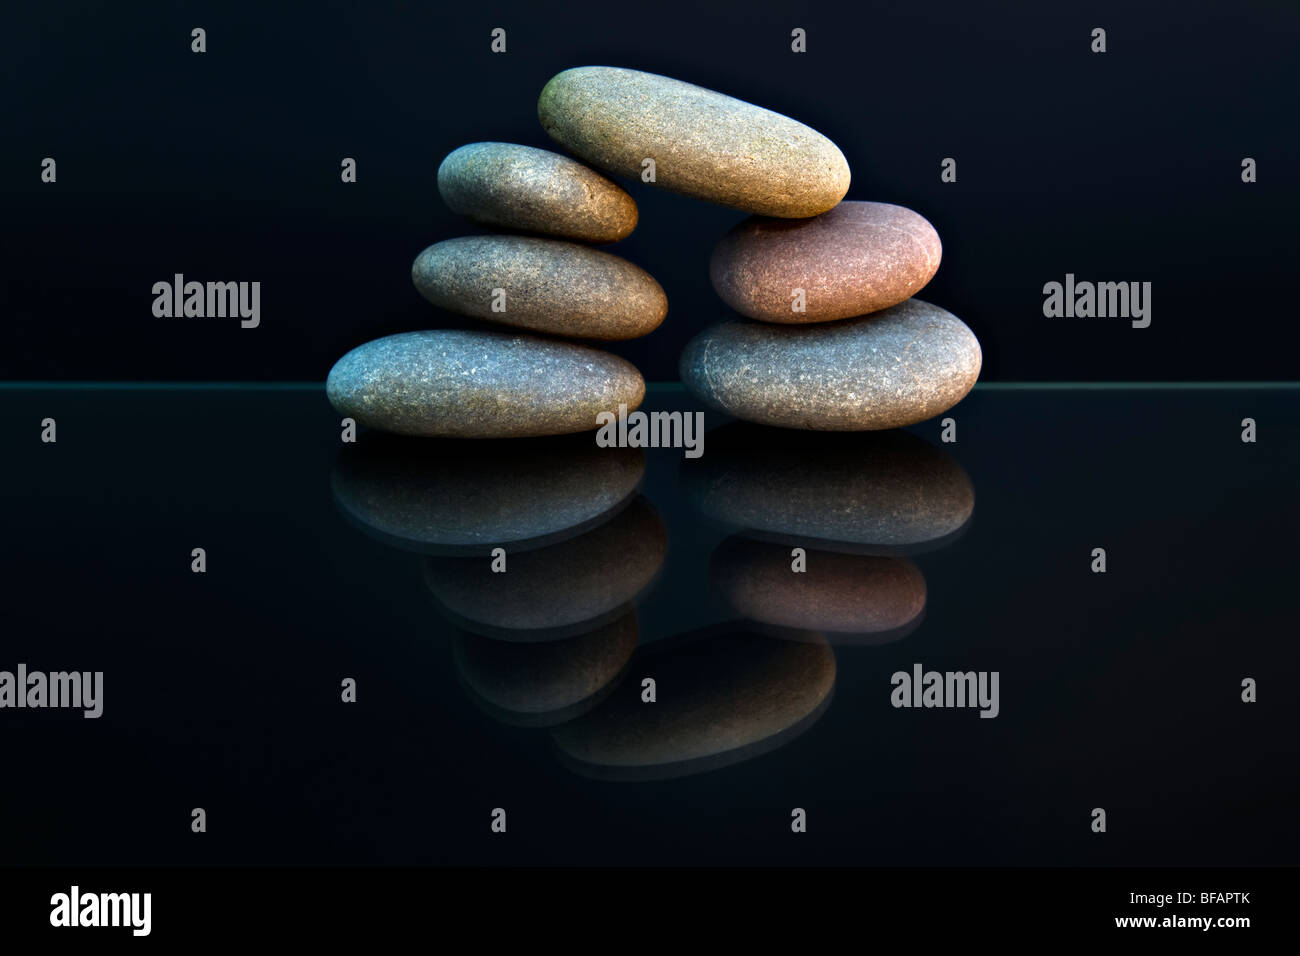 Still life shot of beach pebbles balanced in a stone pile against black background with reflection making a circular shape Stock Photo